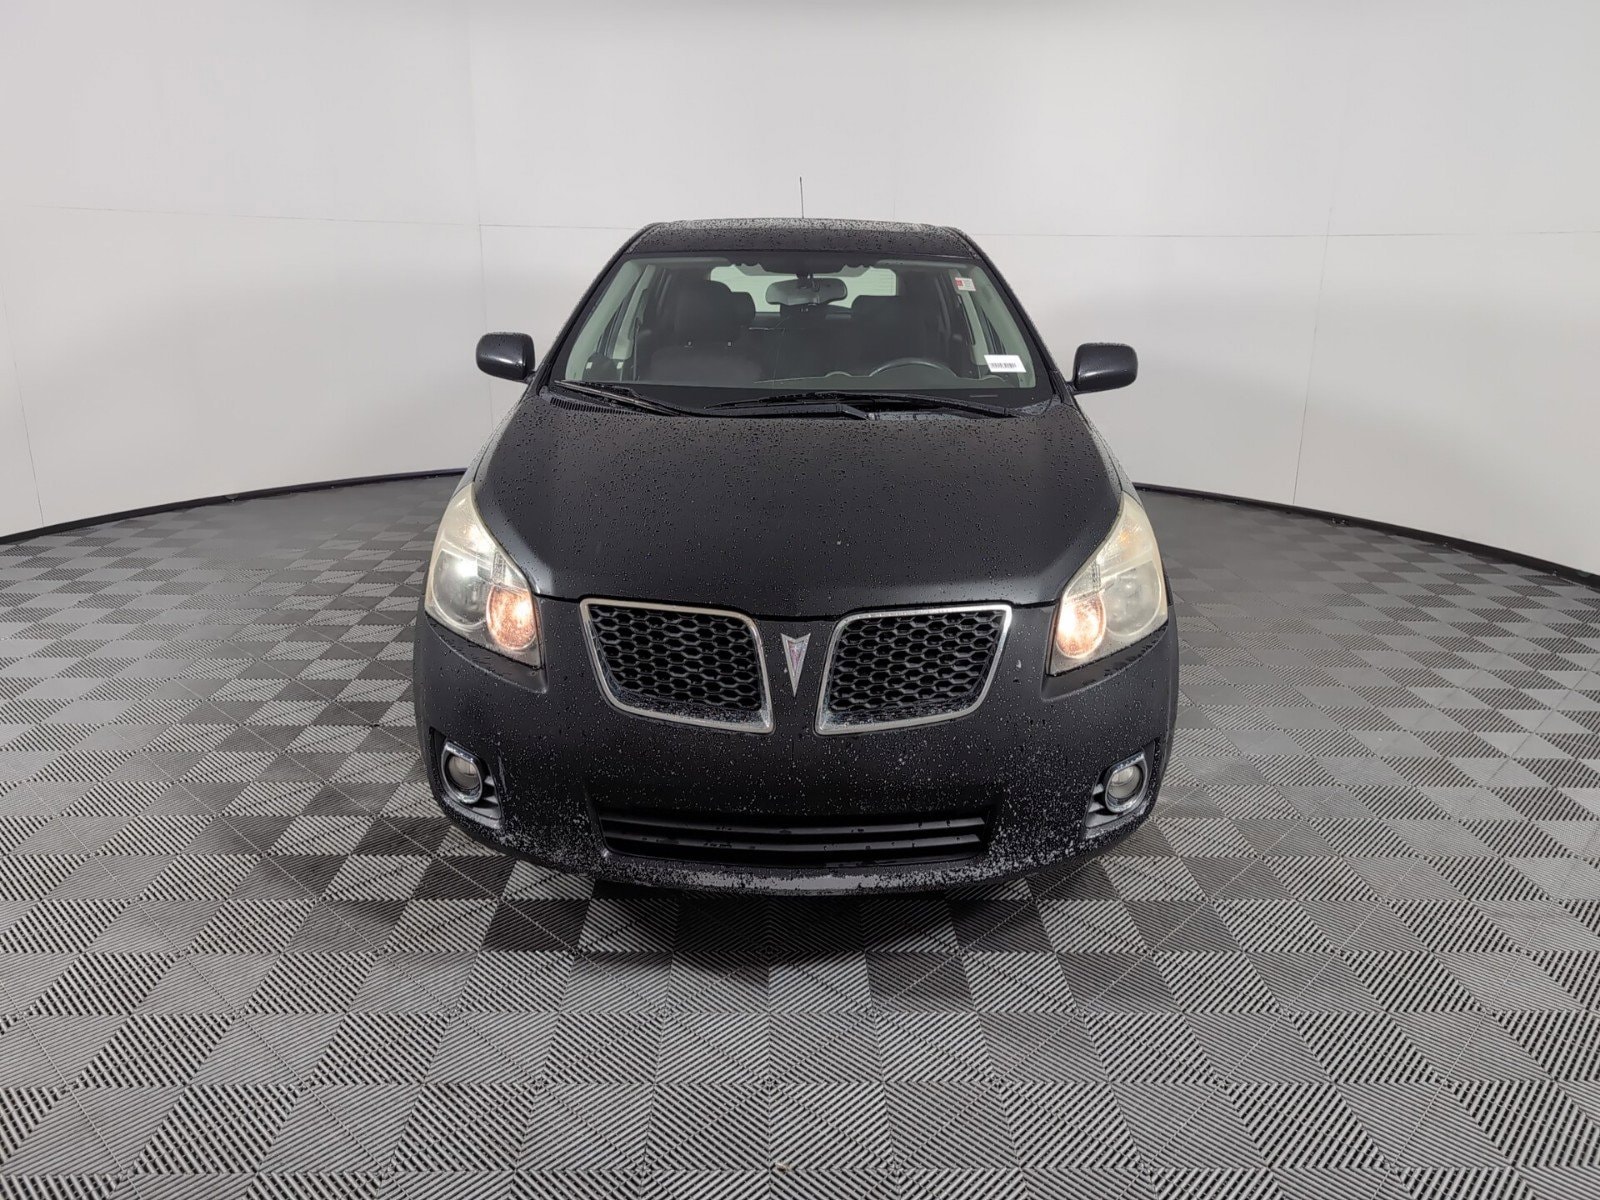 Used 2009 Pontiac Vibe Base with VIN 5Y2SL67039Z448962 for sale in Houston, TX